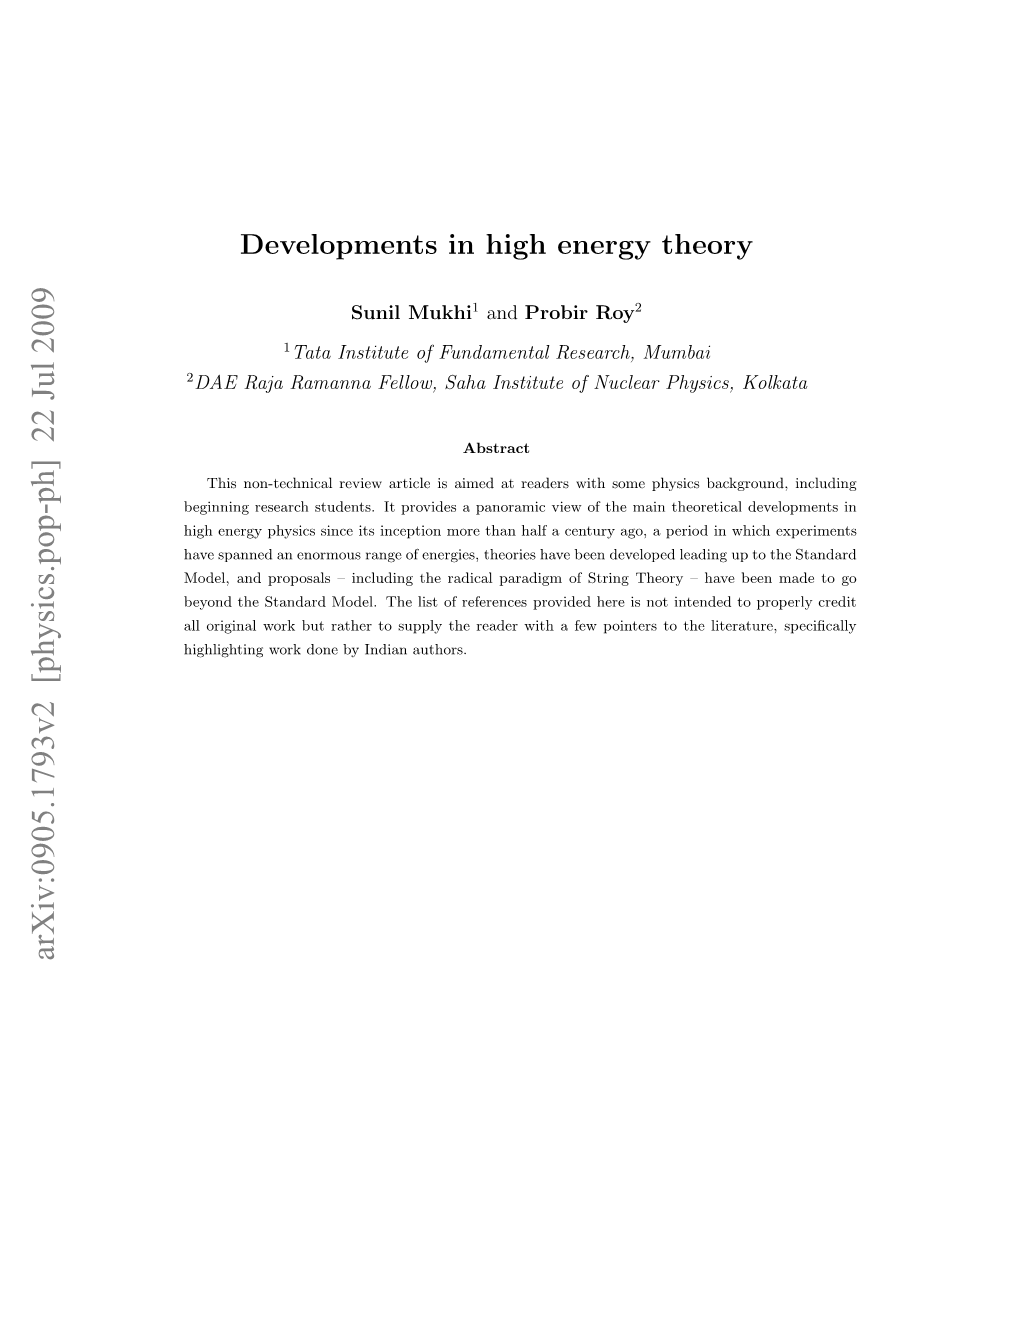 Developments in High Energy Theory